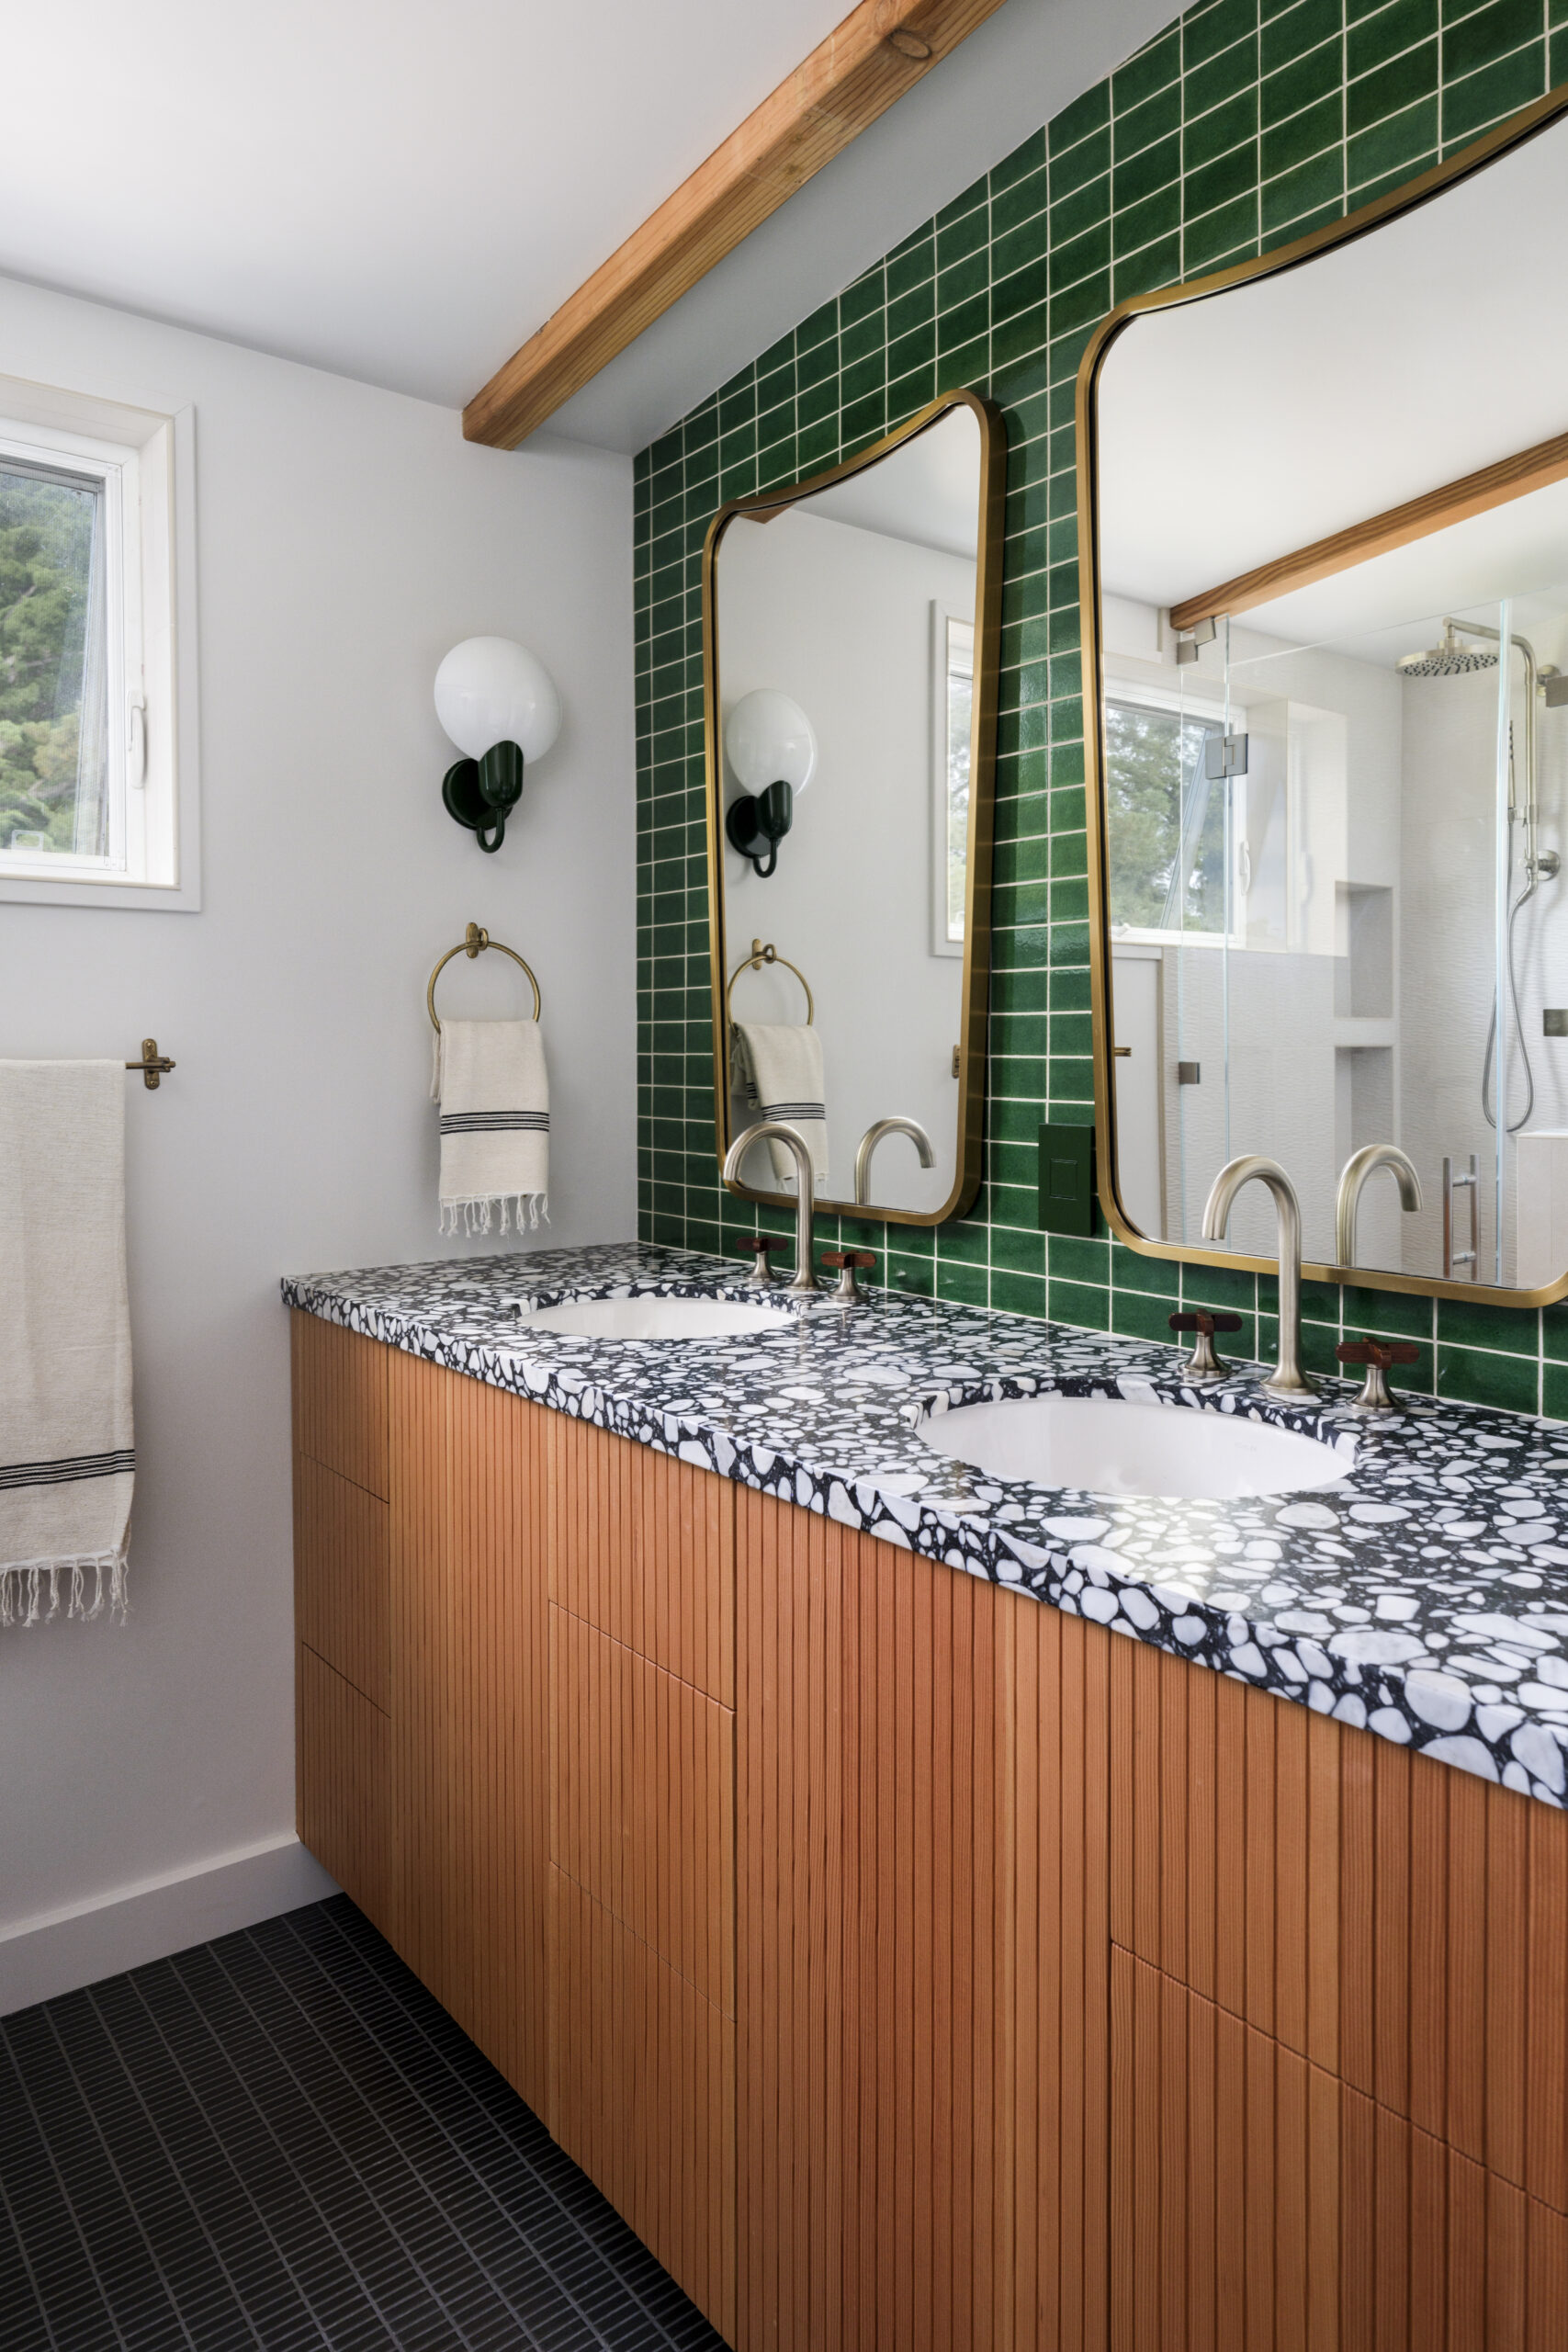 A rich green backsplash provides more drama rooted in a natural vein. (Christopher Stark)